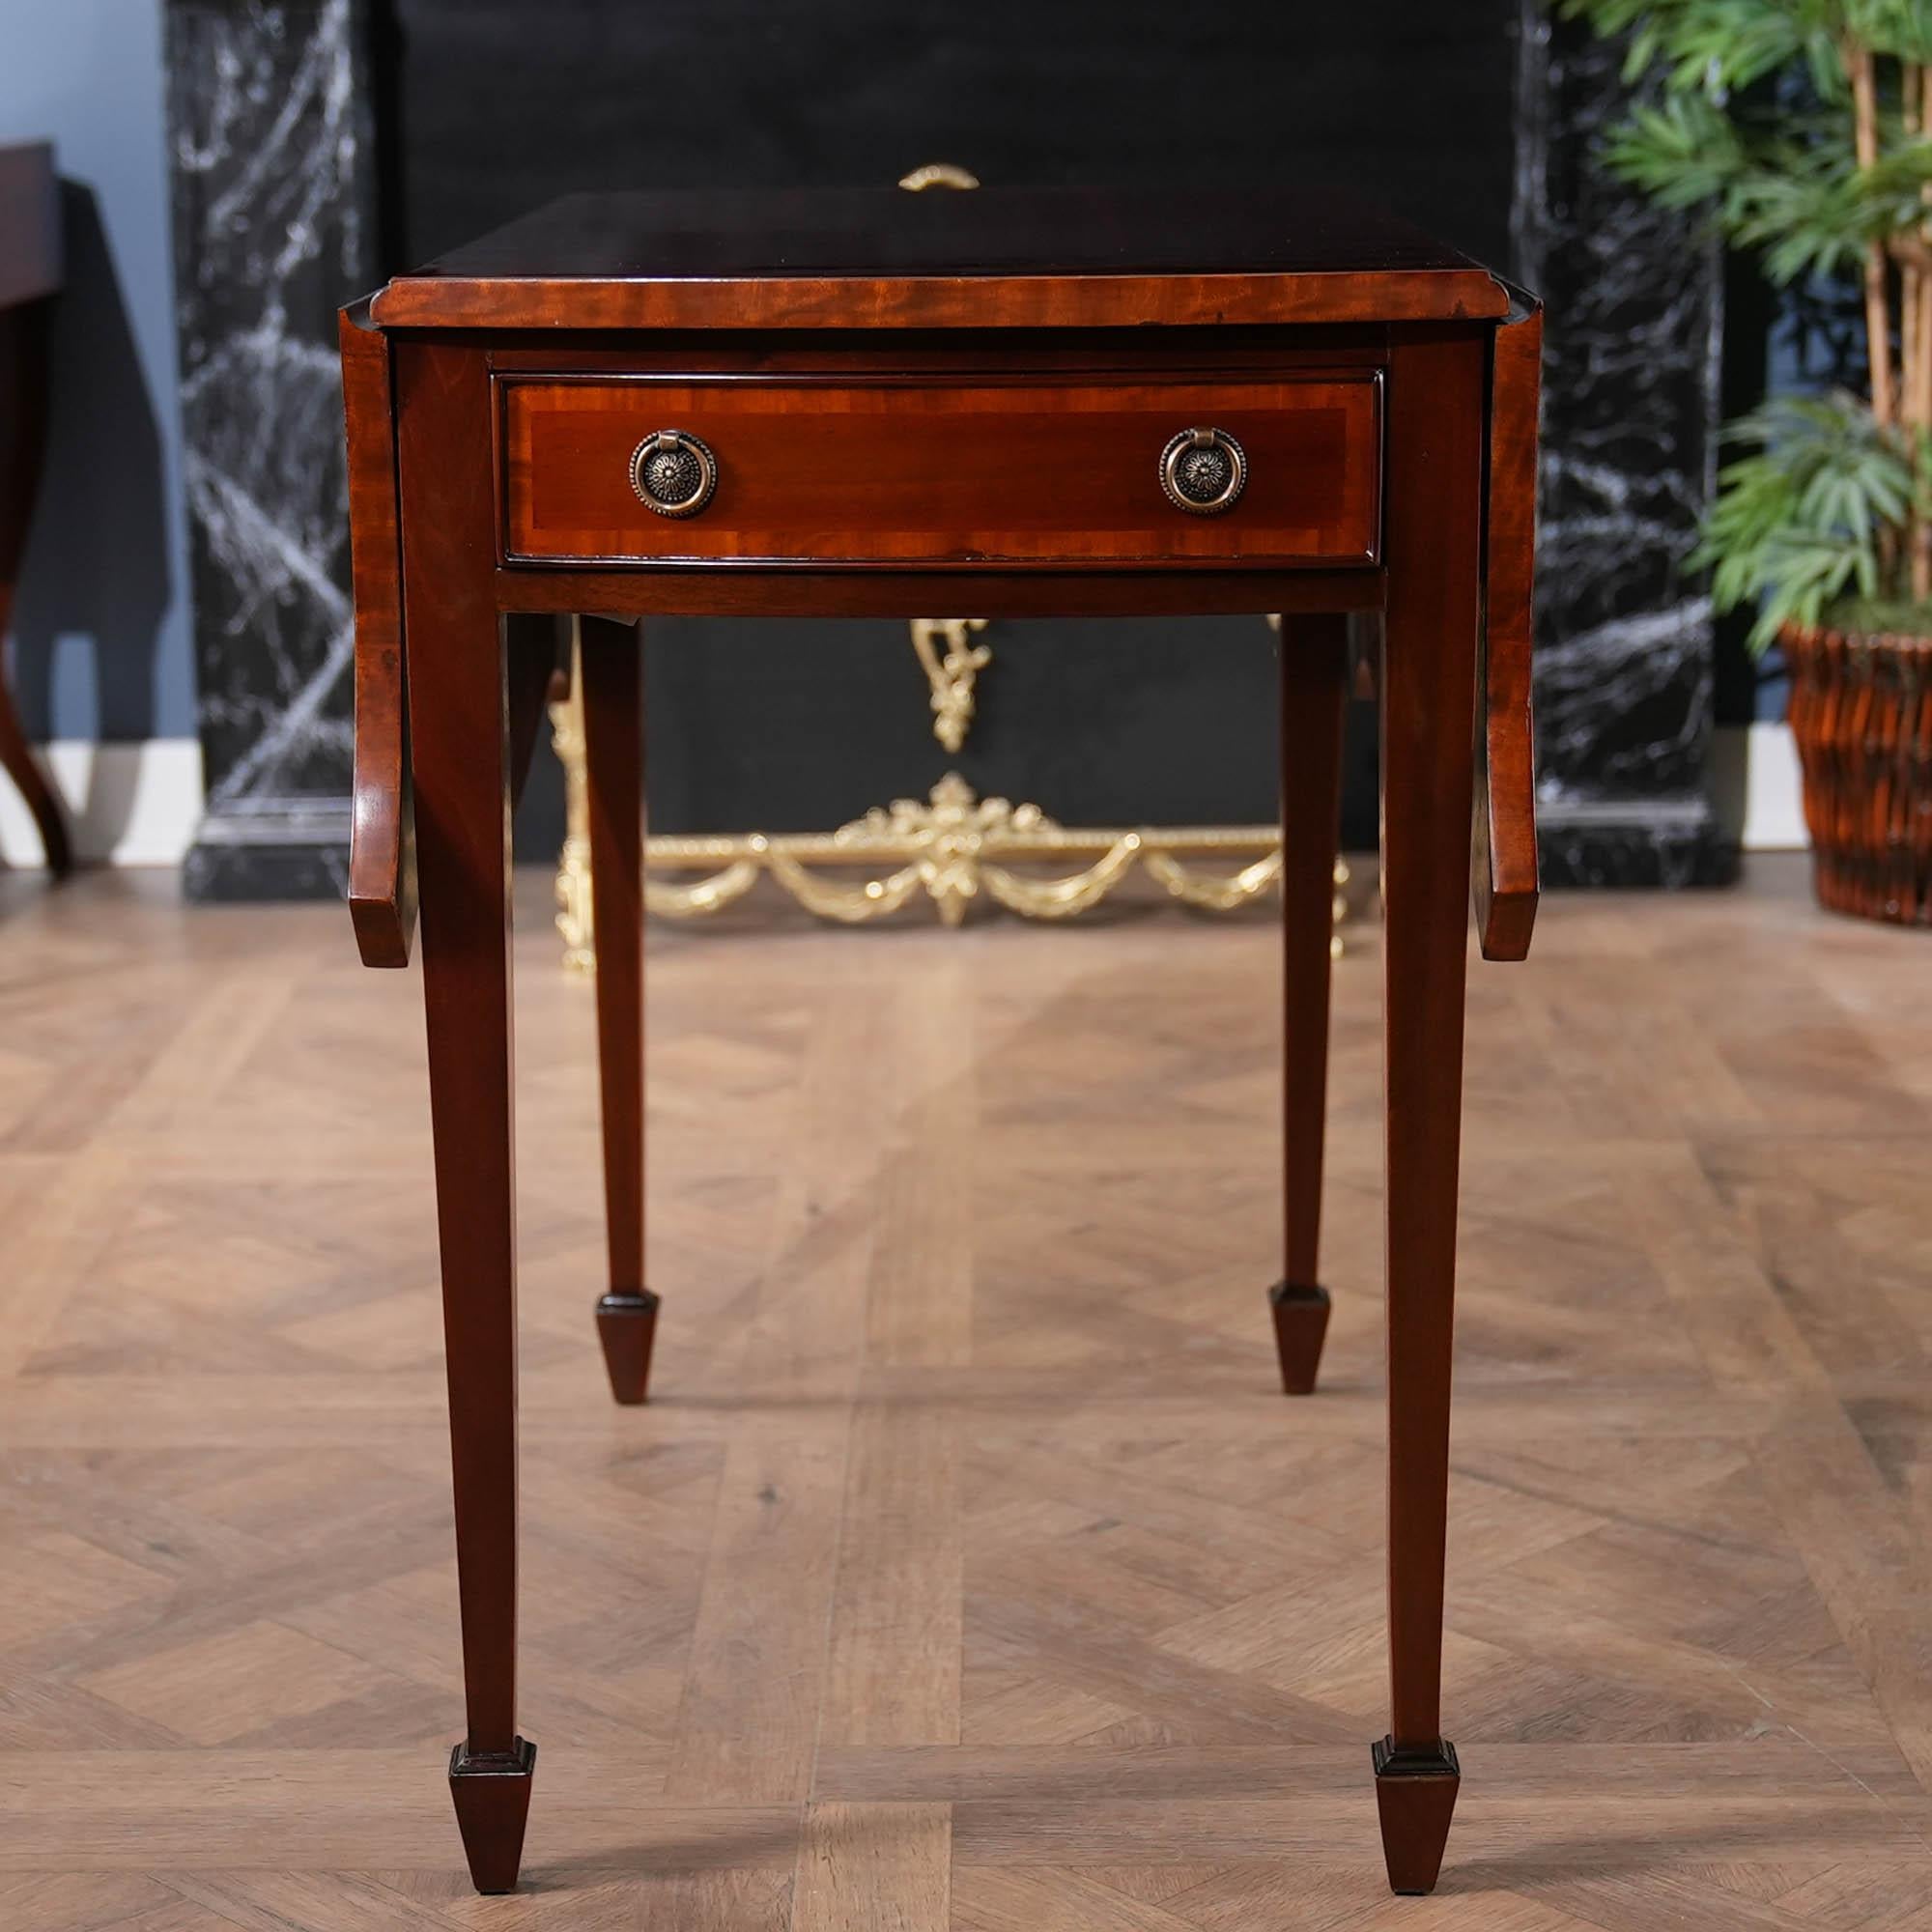 This beautiful Mahogany Pembroke Table from Niagara Furniture will be recognizable to anyone familiar with fine antiques. Originally designed by Henry Herbert, 9th Earl of Pembroke, the form was made popular by various furniture designers in 18th